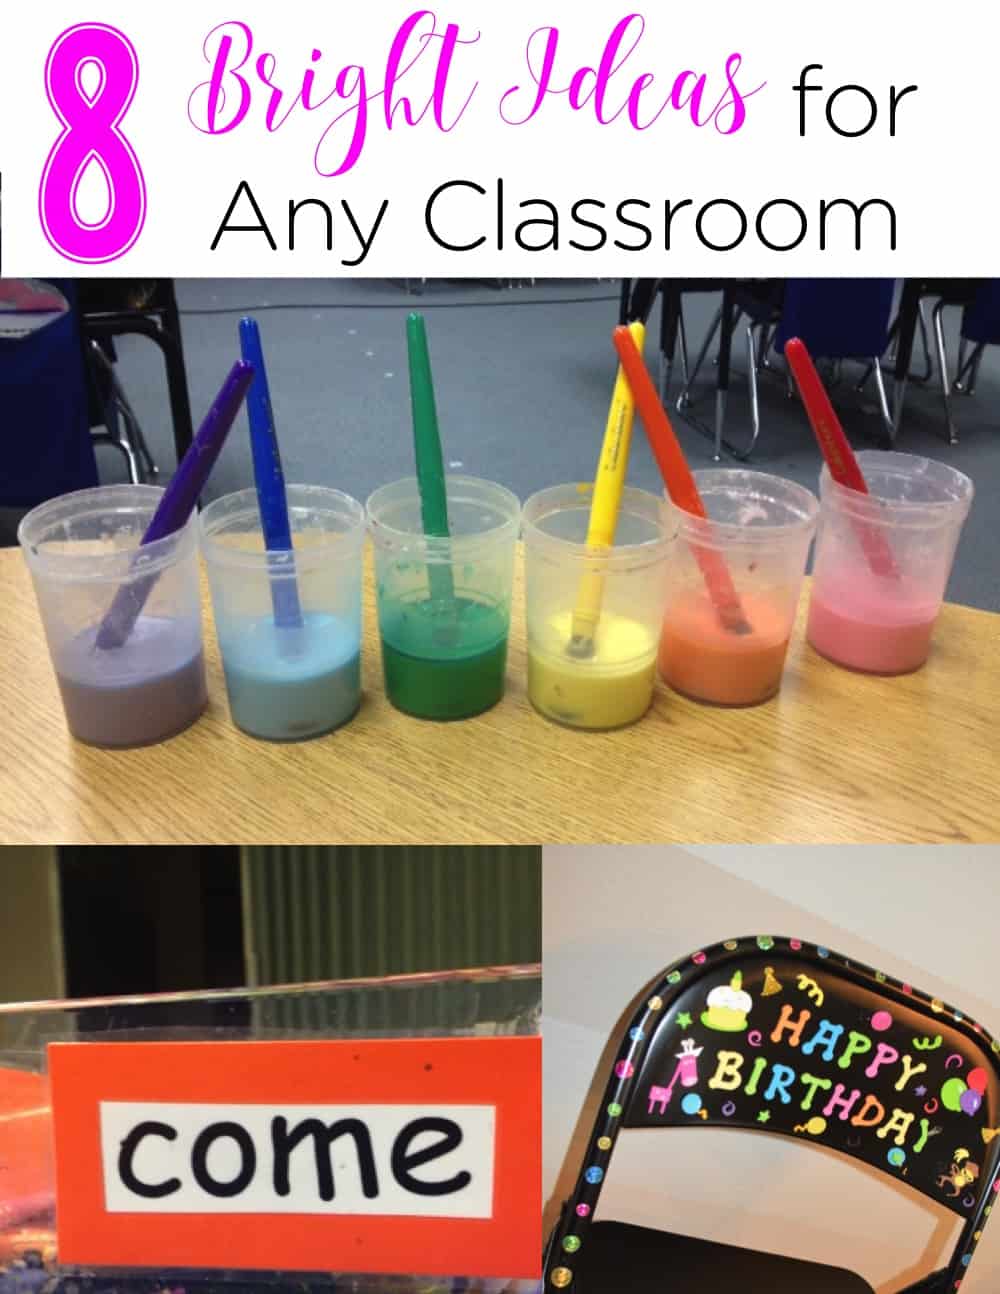 These 8 bright ideas are perfect for any classroom! These tips are perfect for new and experienced teachers. Grab some ideas for classroom management, celebrations, activities, and more! I especially LOVE the birthday chair! #ClassroomIdeas #TeacherTips